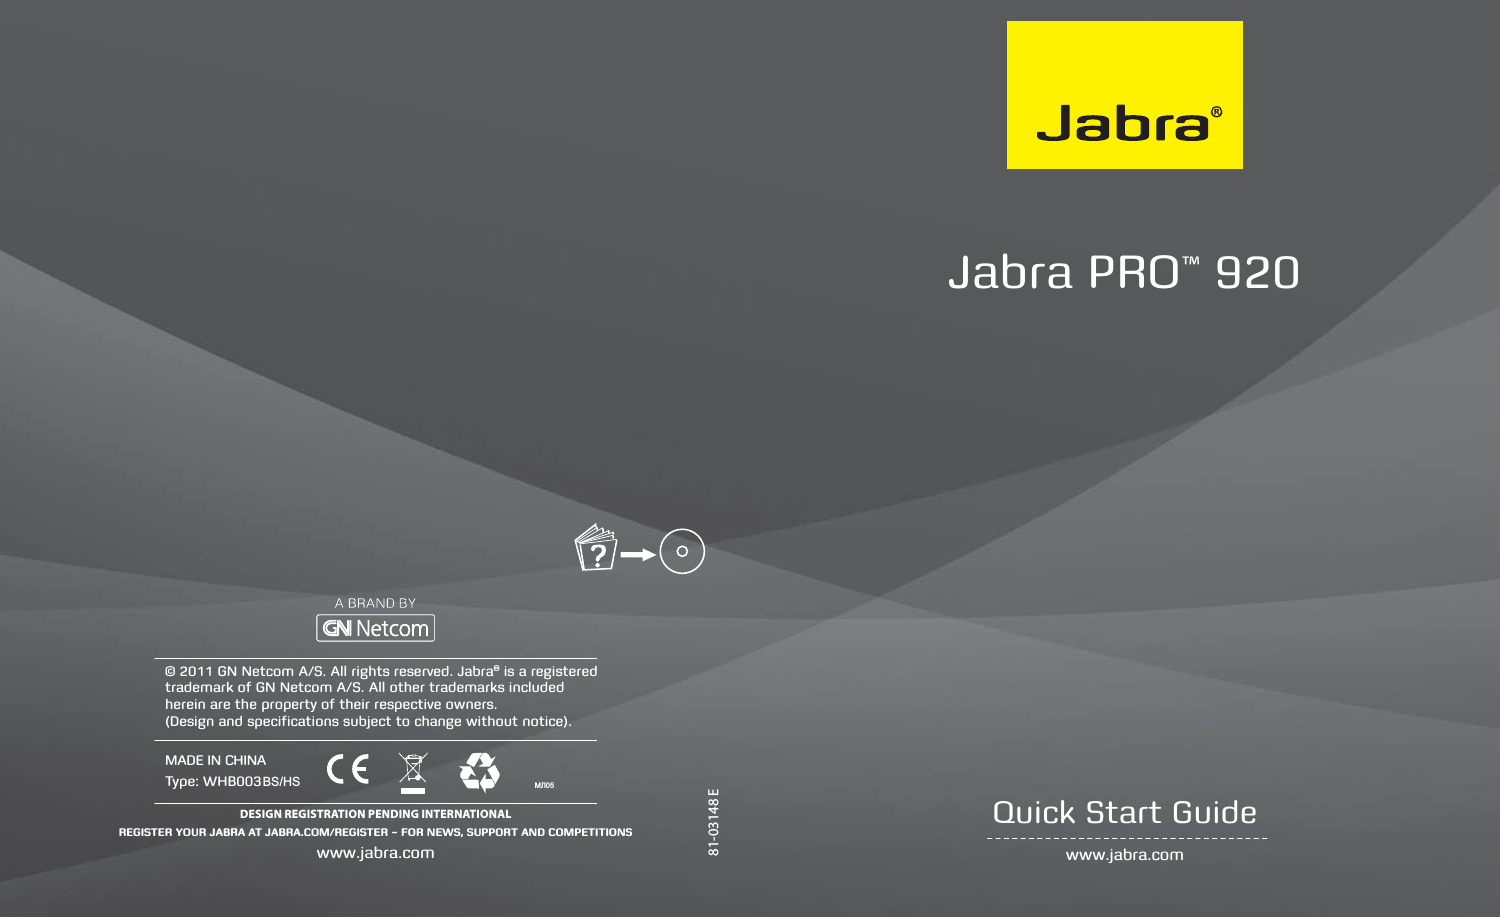 81-03148 EJabra PRO™ 920  www.jabra.comQuick Start Guide© 2011 GN Netcom A/S. All rights reserved. Jabra® is a registered trademark of GN Netcom A/S. All other trademarks included herein are the property of their respective owners.  (Design and specifications subject to change without notice).DESIGN REGISTRATION PENDING INTERNATIONALREGISTER YOUR JABRA AT JABRA.COM/REGISTER – FOR NEWS, SUPPORT AND COMPETITIONSwww.jabra.comMADE IN CHINAType: WHB003?BS/HS 